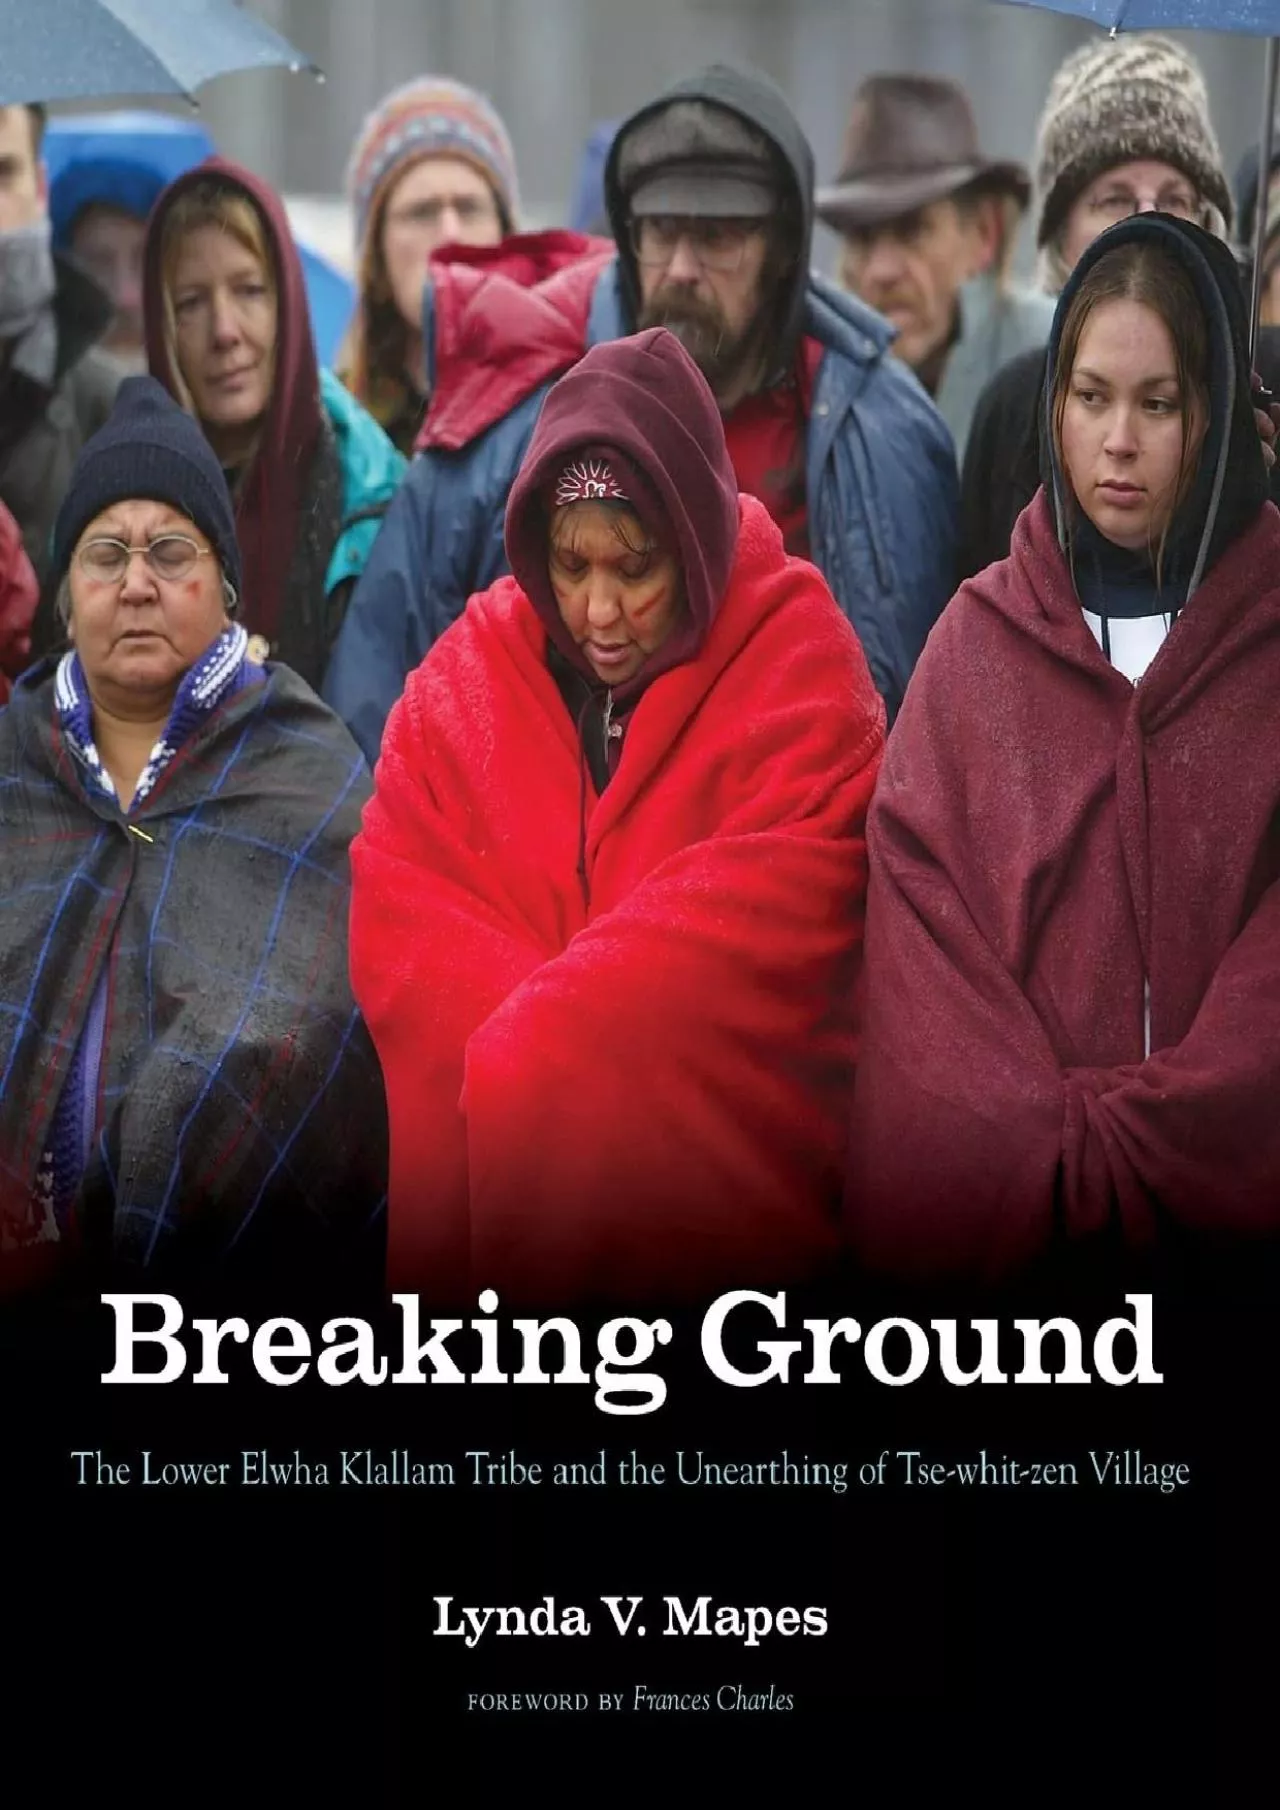 (DOWNLOAD)-Breaking Ground: The Lower Elwha Klallam Tribe and the Unearthing of Tse-whit-zen